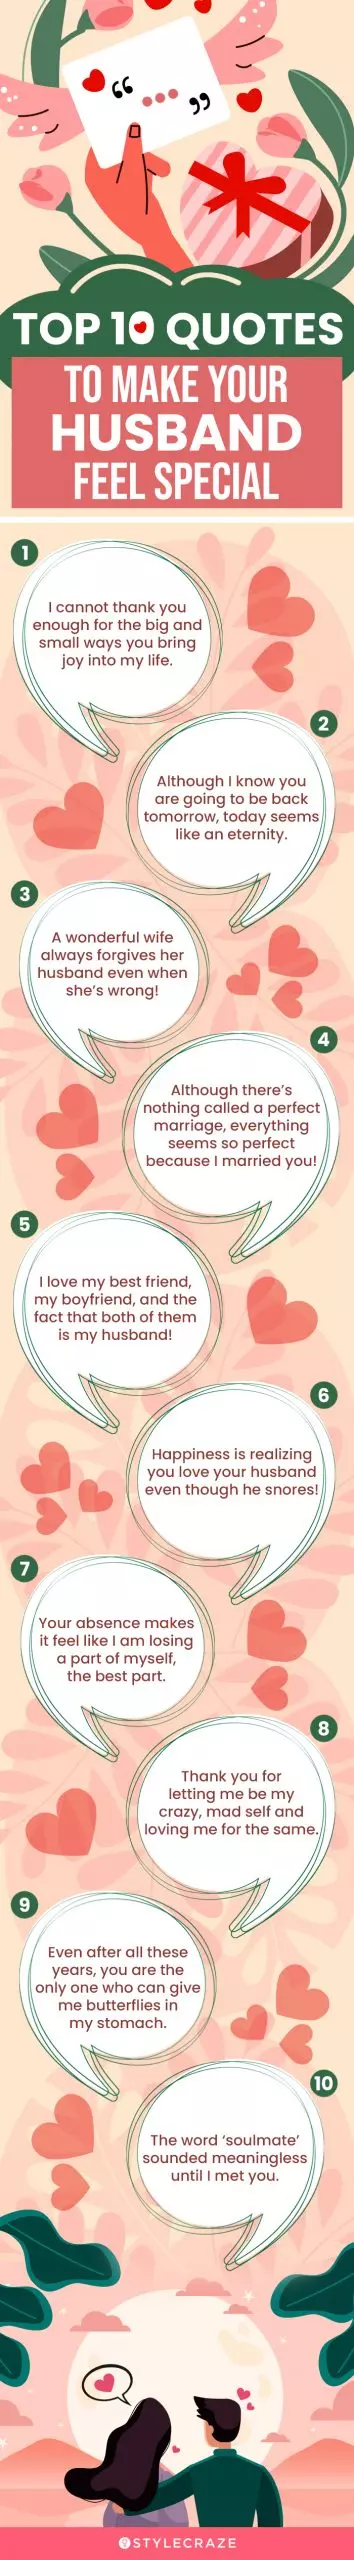 top 10 quotes to make your husband feel special (infographic)